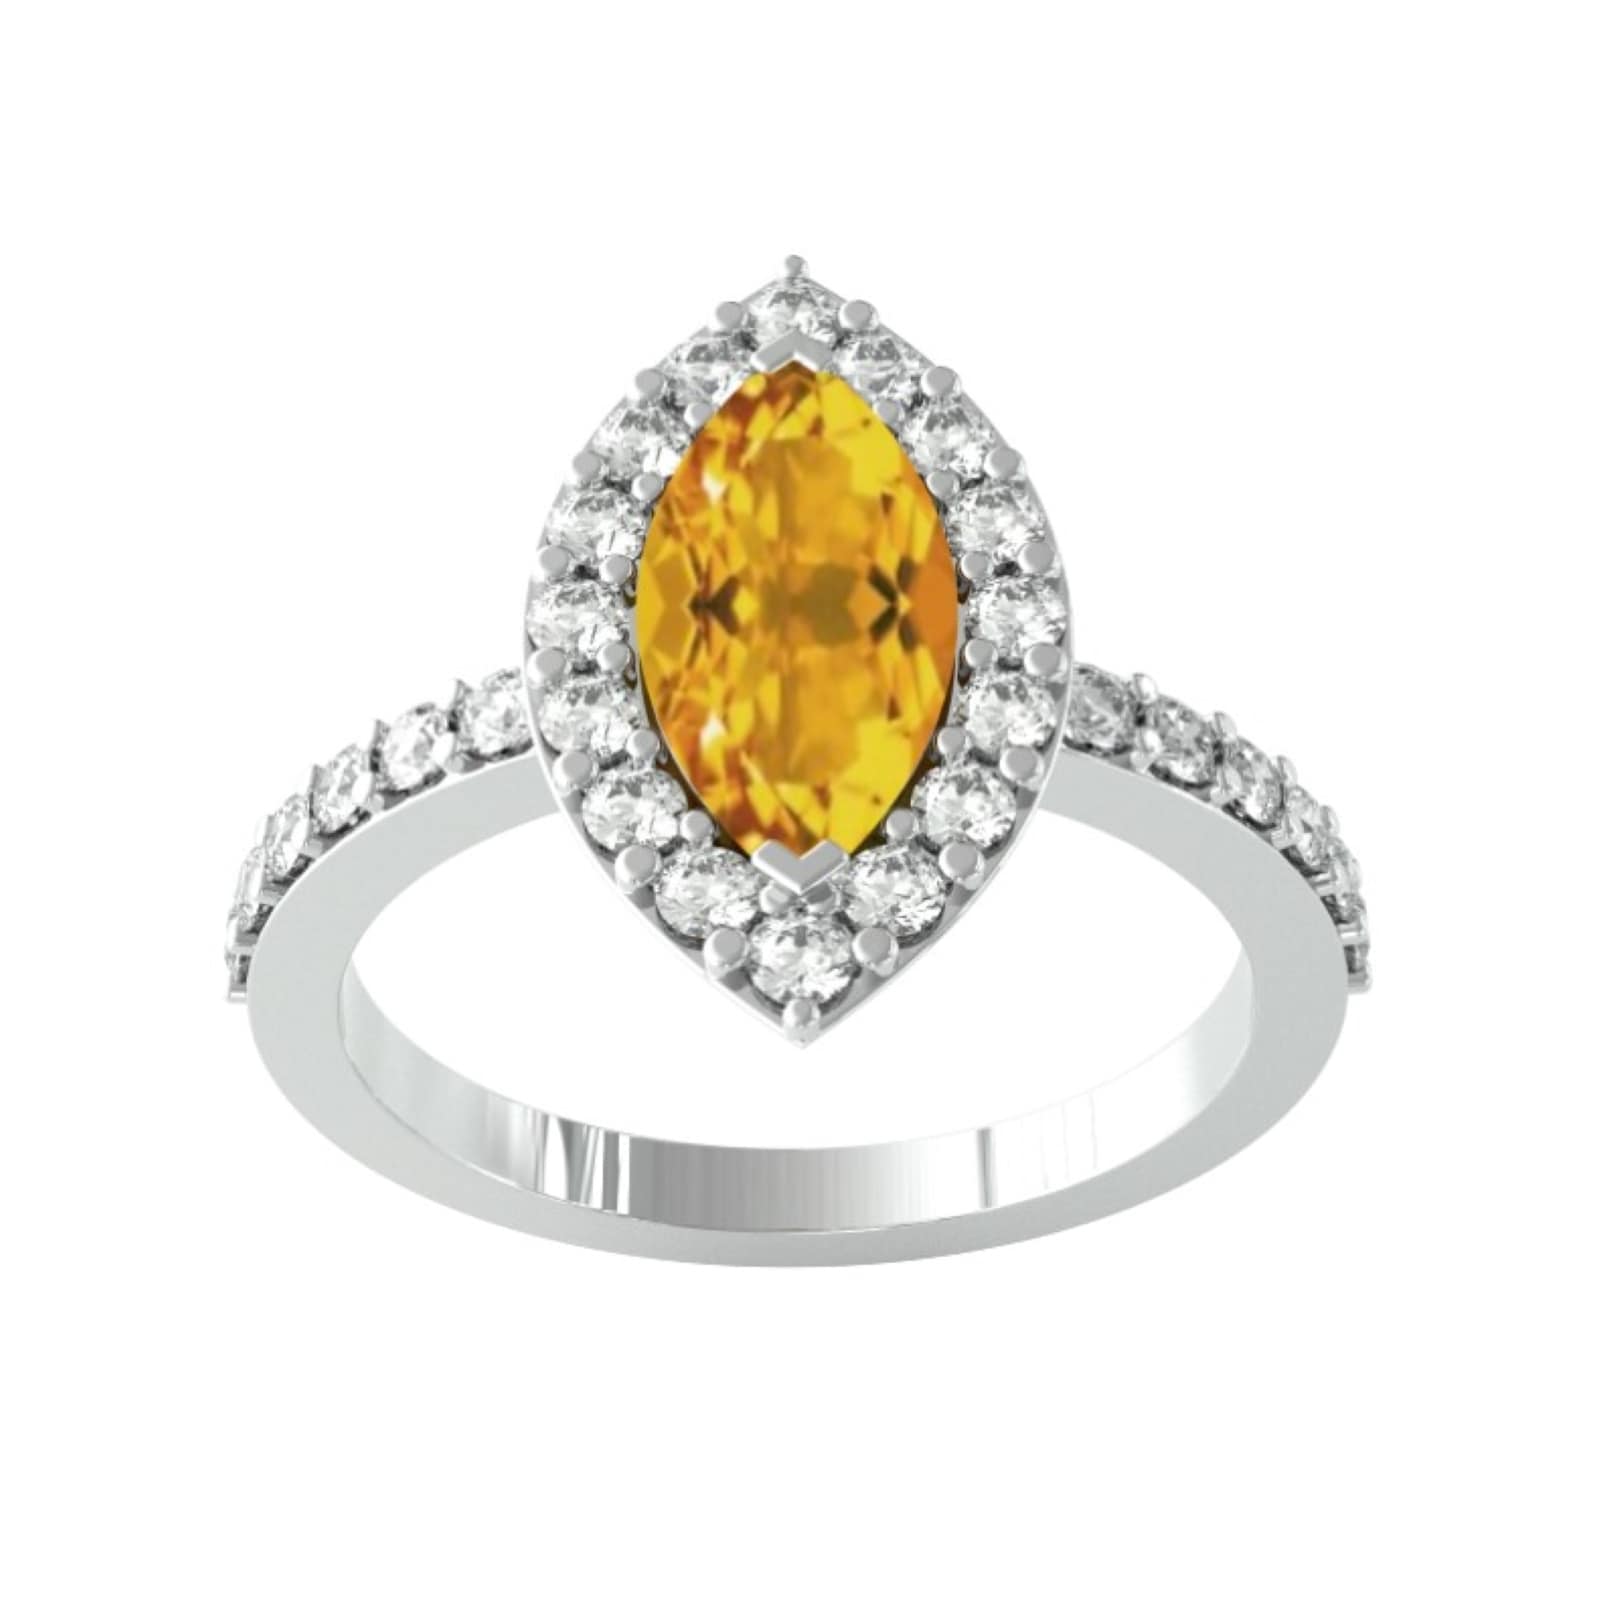 9ct White Gold Marquise Cut Citrine & Diamond Ring - Ring Size E.5